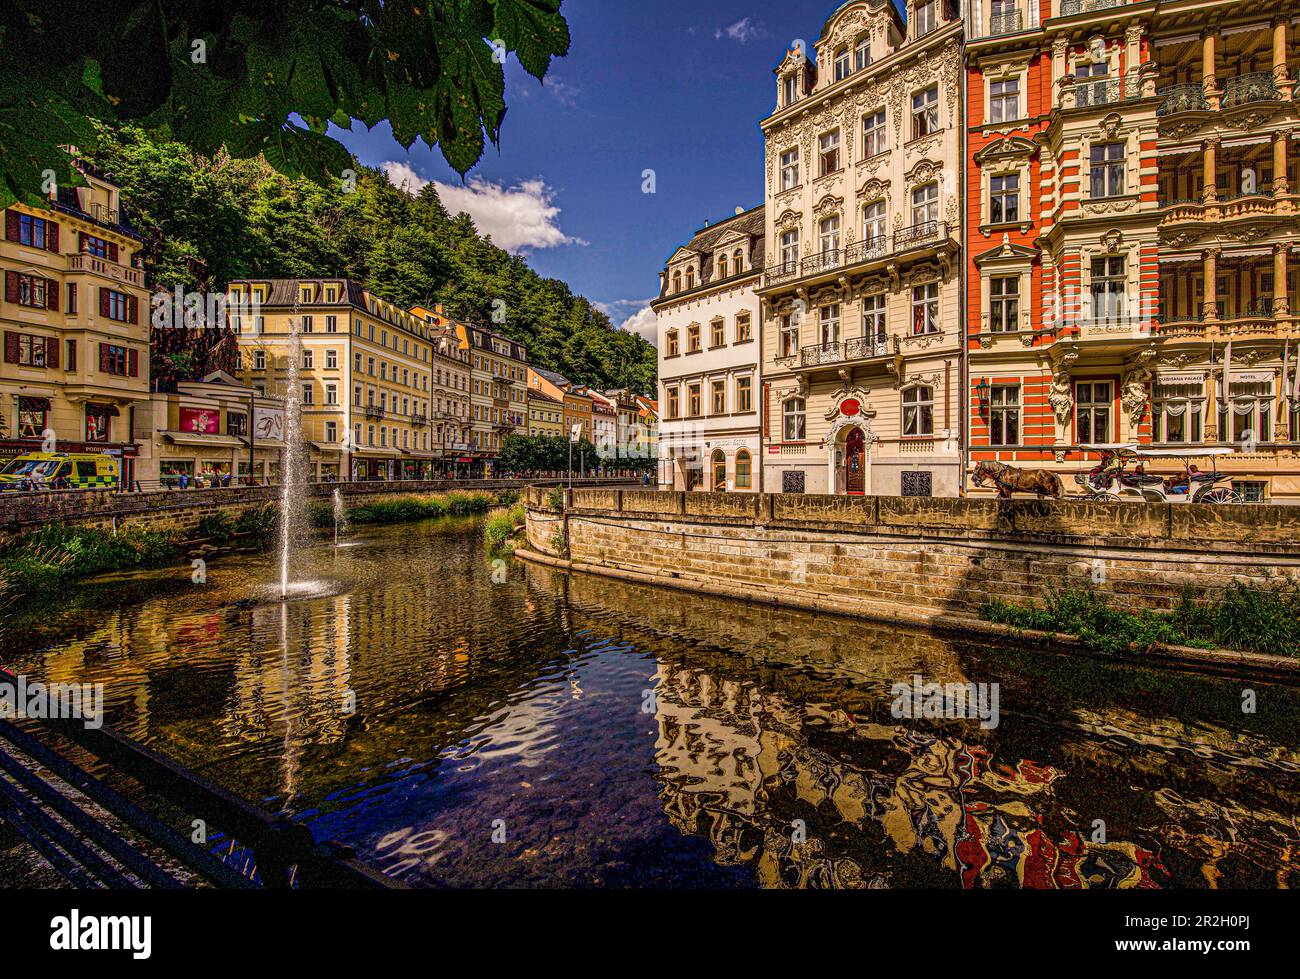 The Tepl (Tepla) in the spa district, waterfront with carriage, Karlovy Vary, Karlovy Vary, Czech Republic Stock Photo